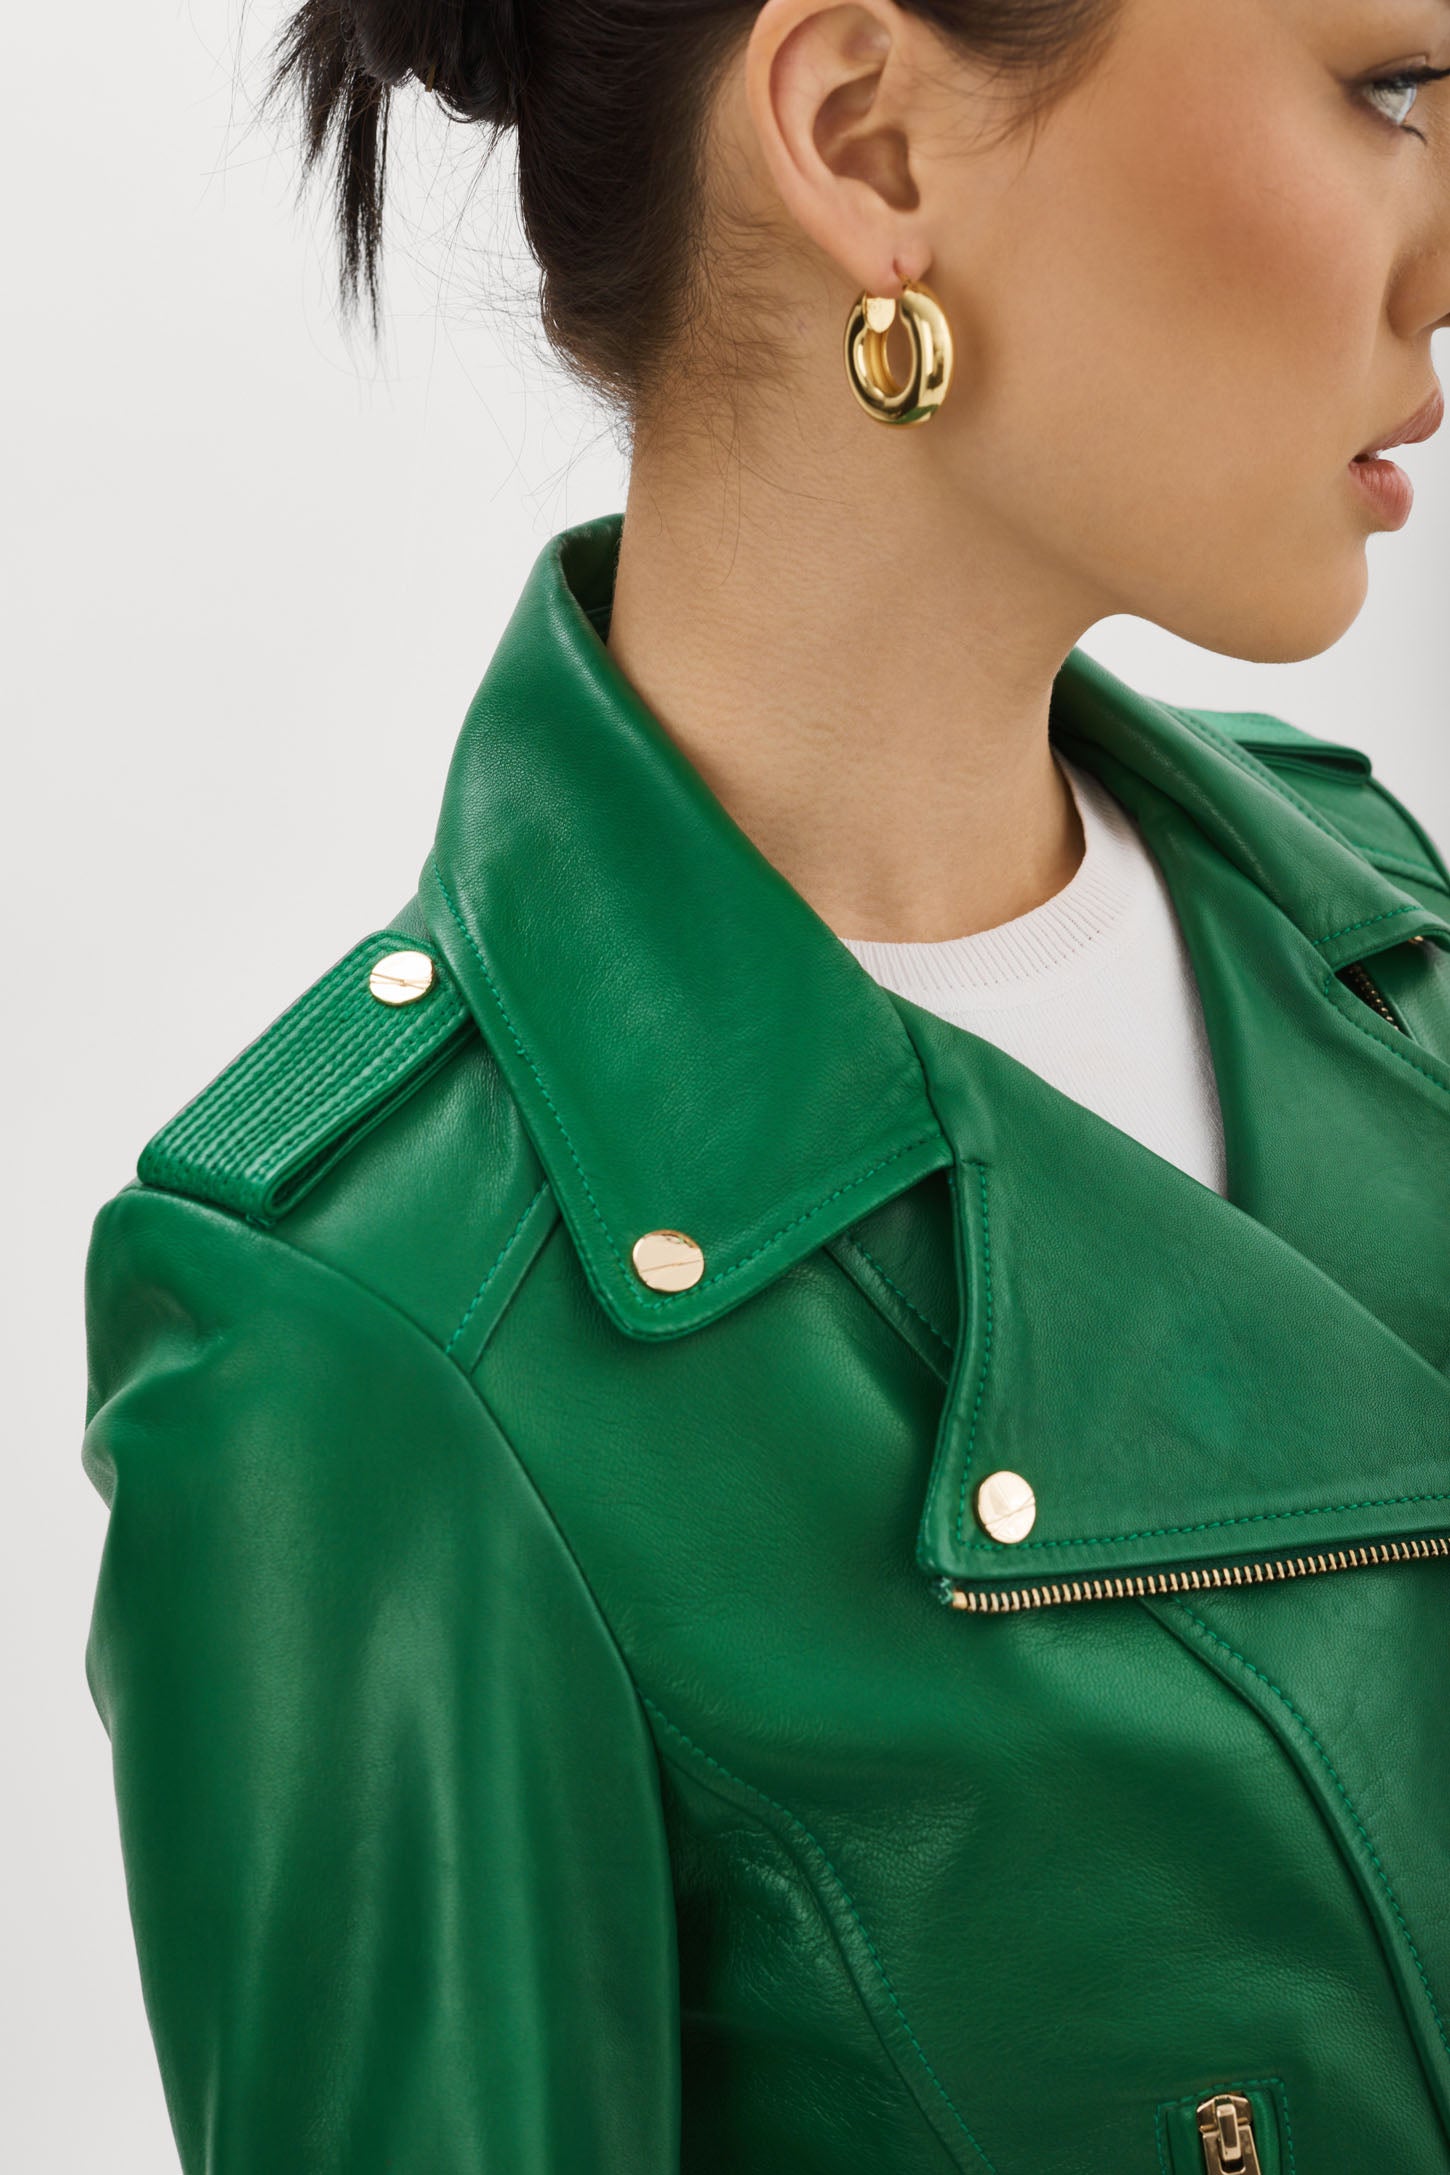 leather jacket green